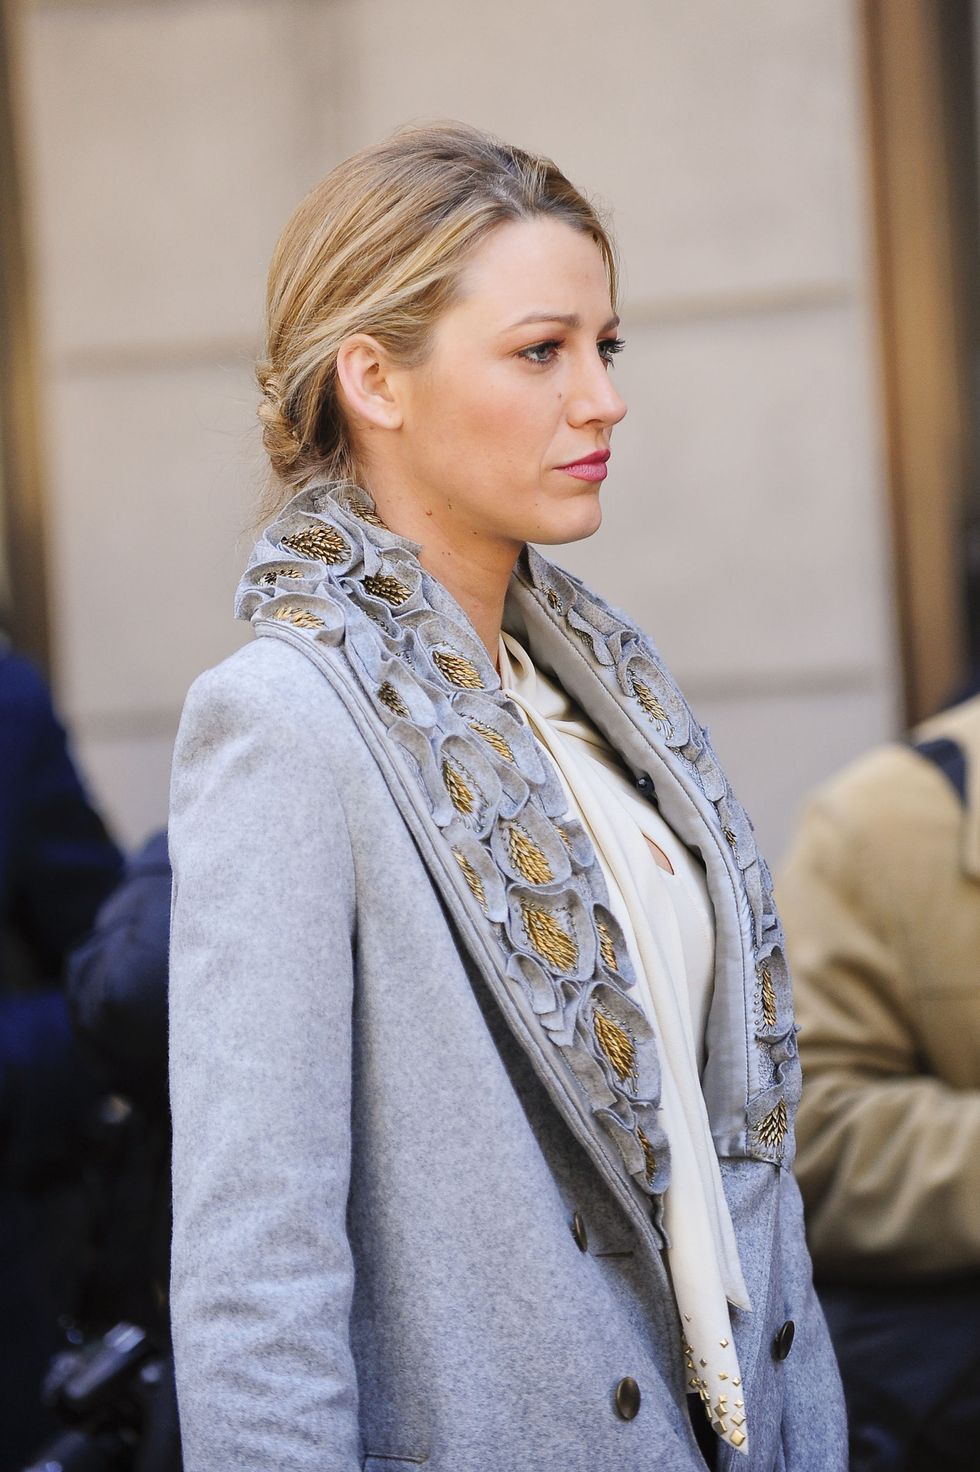 NEW YORK - OCTOBER 19:  Actress Blake Lively films a scene on location at the "Gossip Girl" film set at the Empire Hotel on October 19, 2009 in New York City.  (Photo by Ray Tamarra/Getty Images)